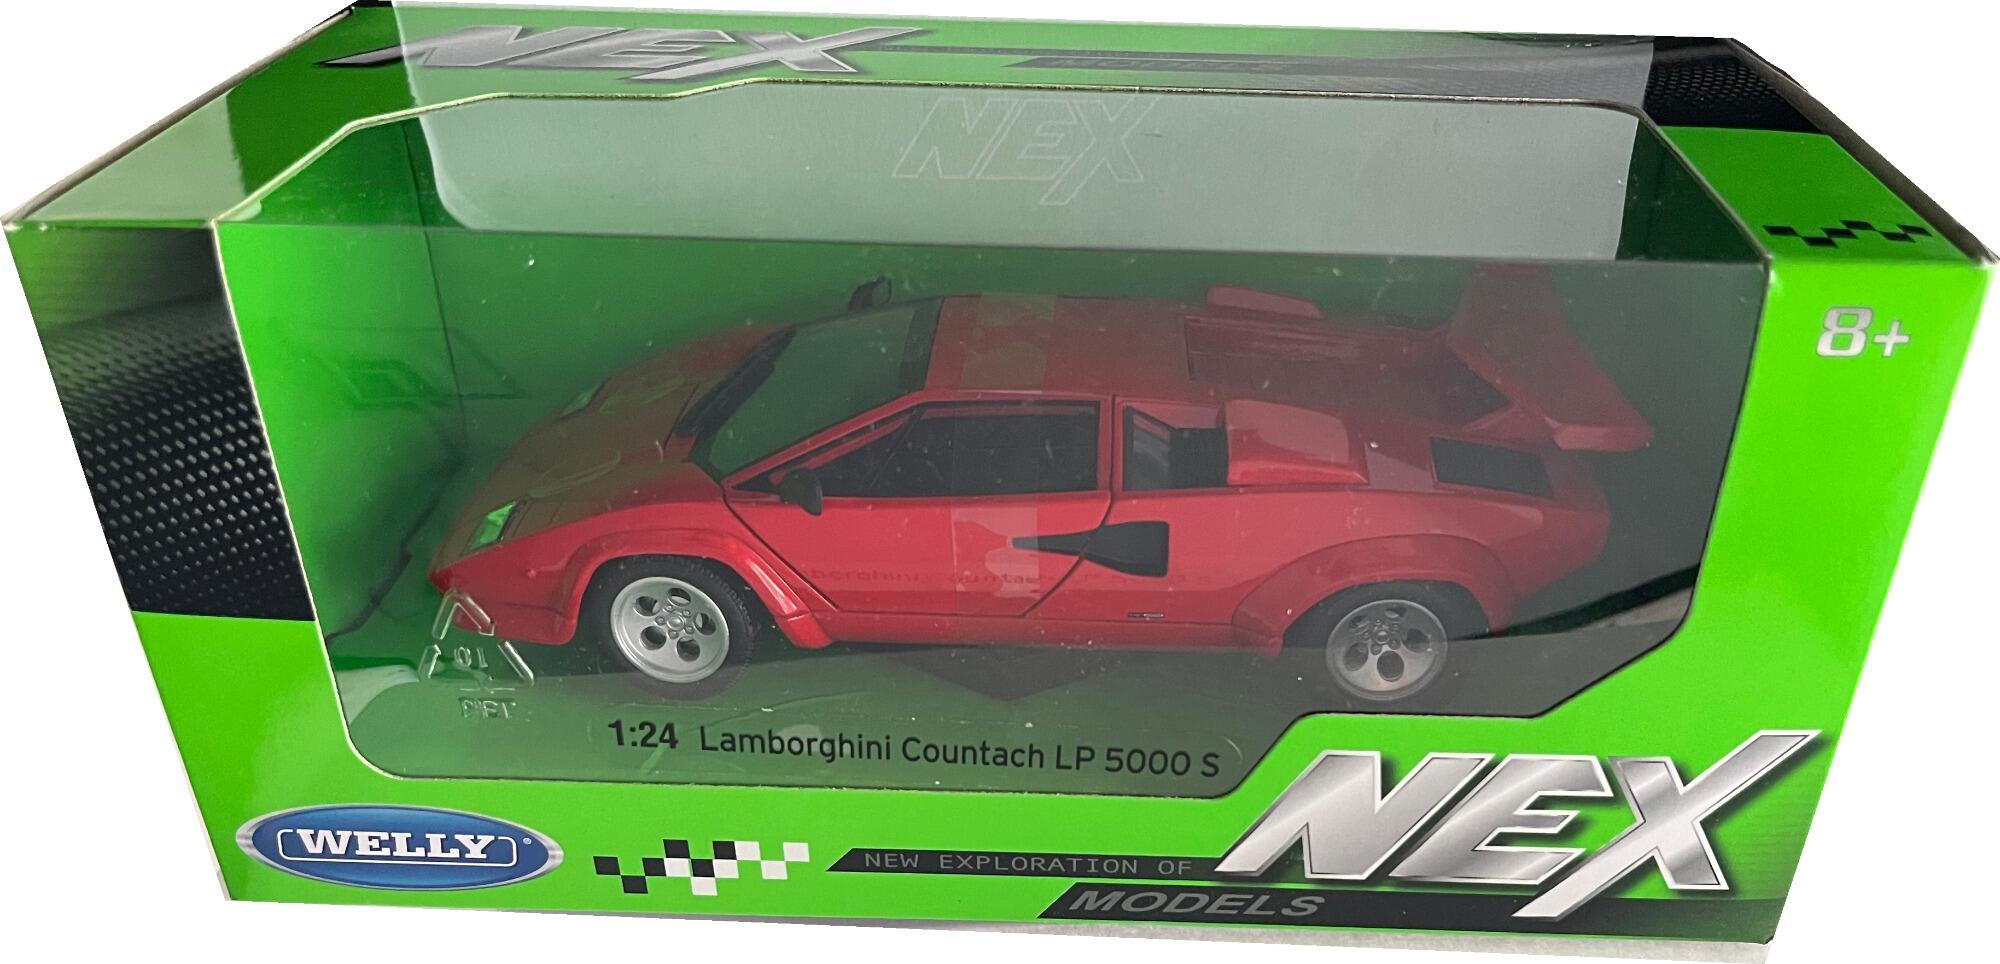 An excellent reproduction of the Lamborghini Countach LP 5000S with high level of detail throughout, all authentically recreated. The Countach LP 5000S model is presented in a window display box, the car is approx. 17.5 cm long and the presentation box is 23 cm long